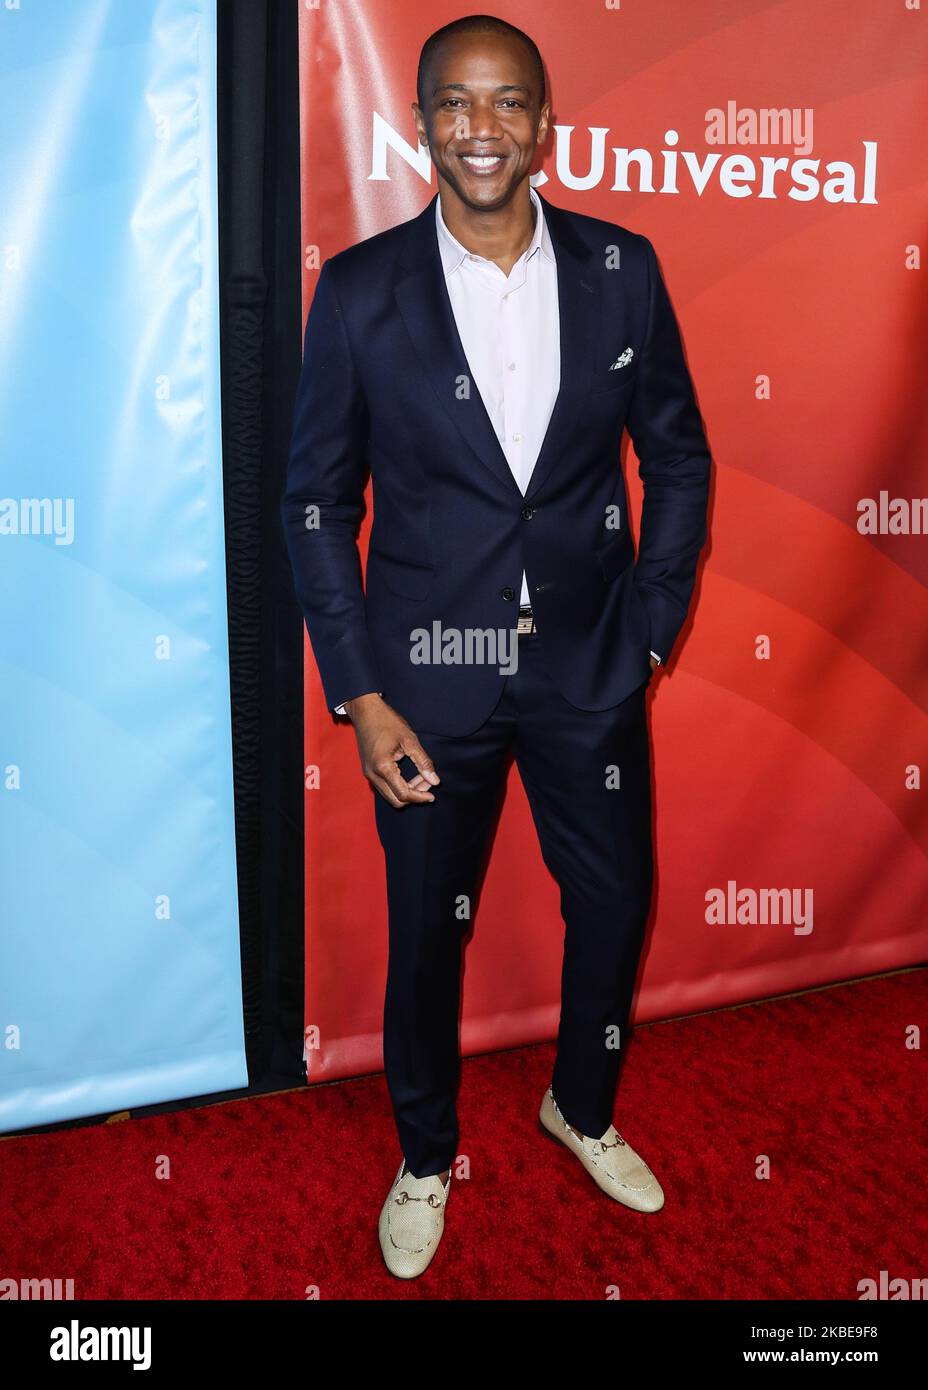 PASADENA, LOS ANGELES, CALIFORNIA, USA - JANUARY 11: J. August Richards arrives at the 2020 NBCUniversal Winter TCA Press Tour held at The Langham Huntington Hotel on January 11, 2020 in Pasadena, Los Angeles, California, United States. (Photo by Xavier Collin/Image Press Agency/NurPhoto) Stock Photo